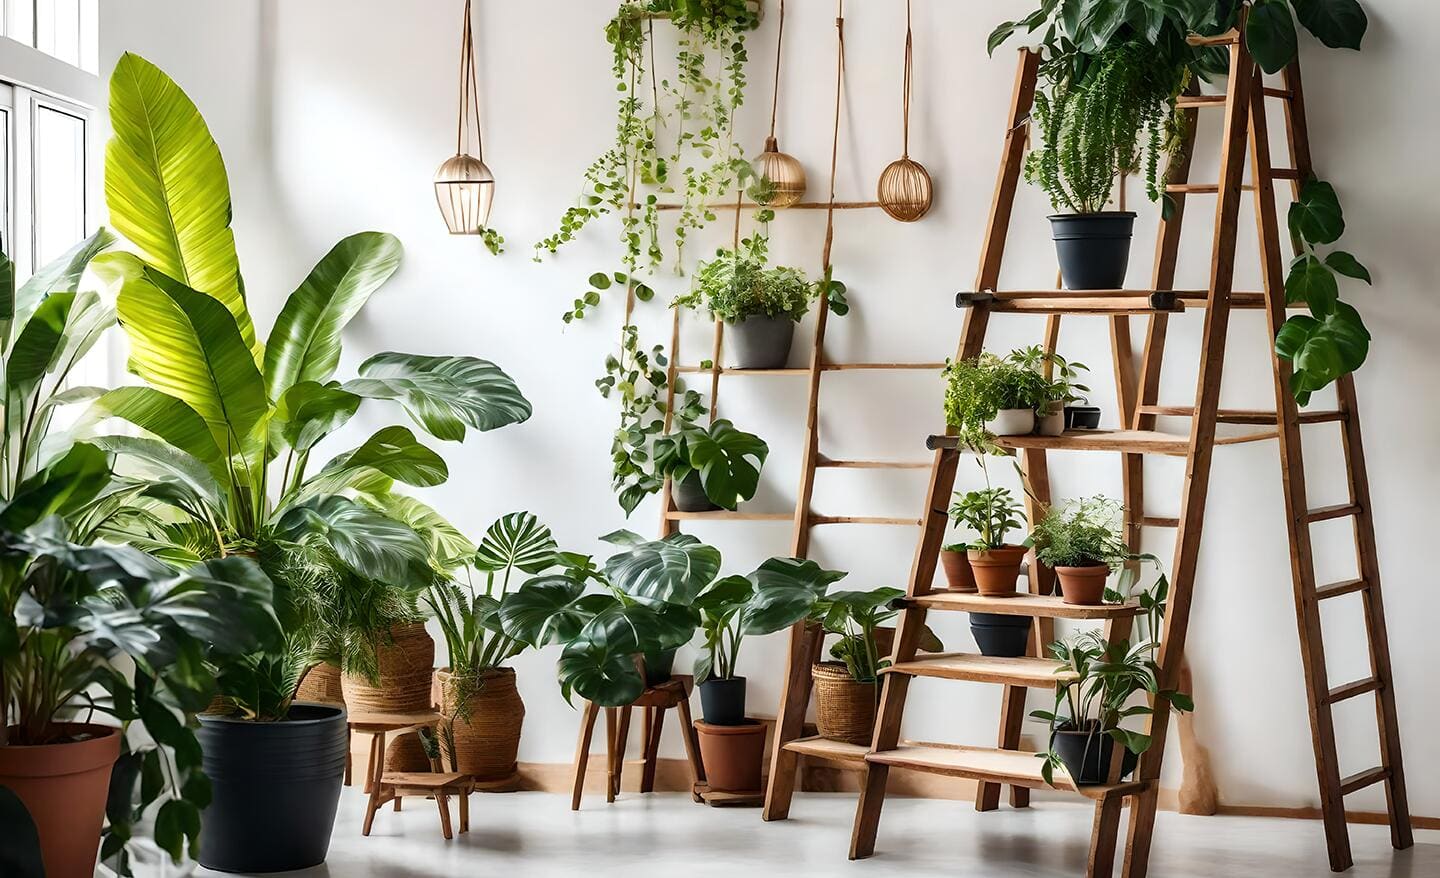 A room filled with houseplants on shelves